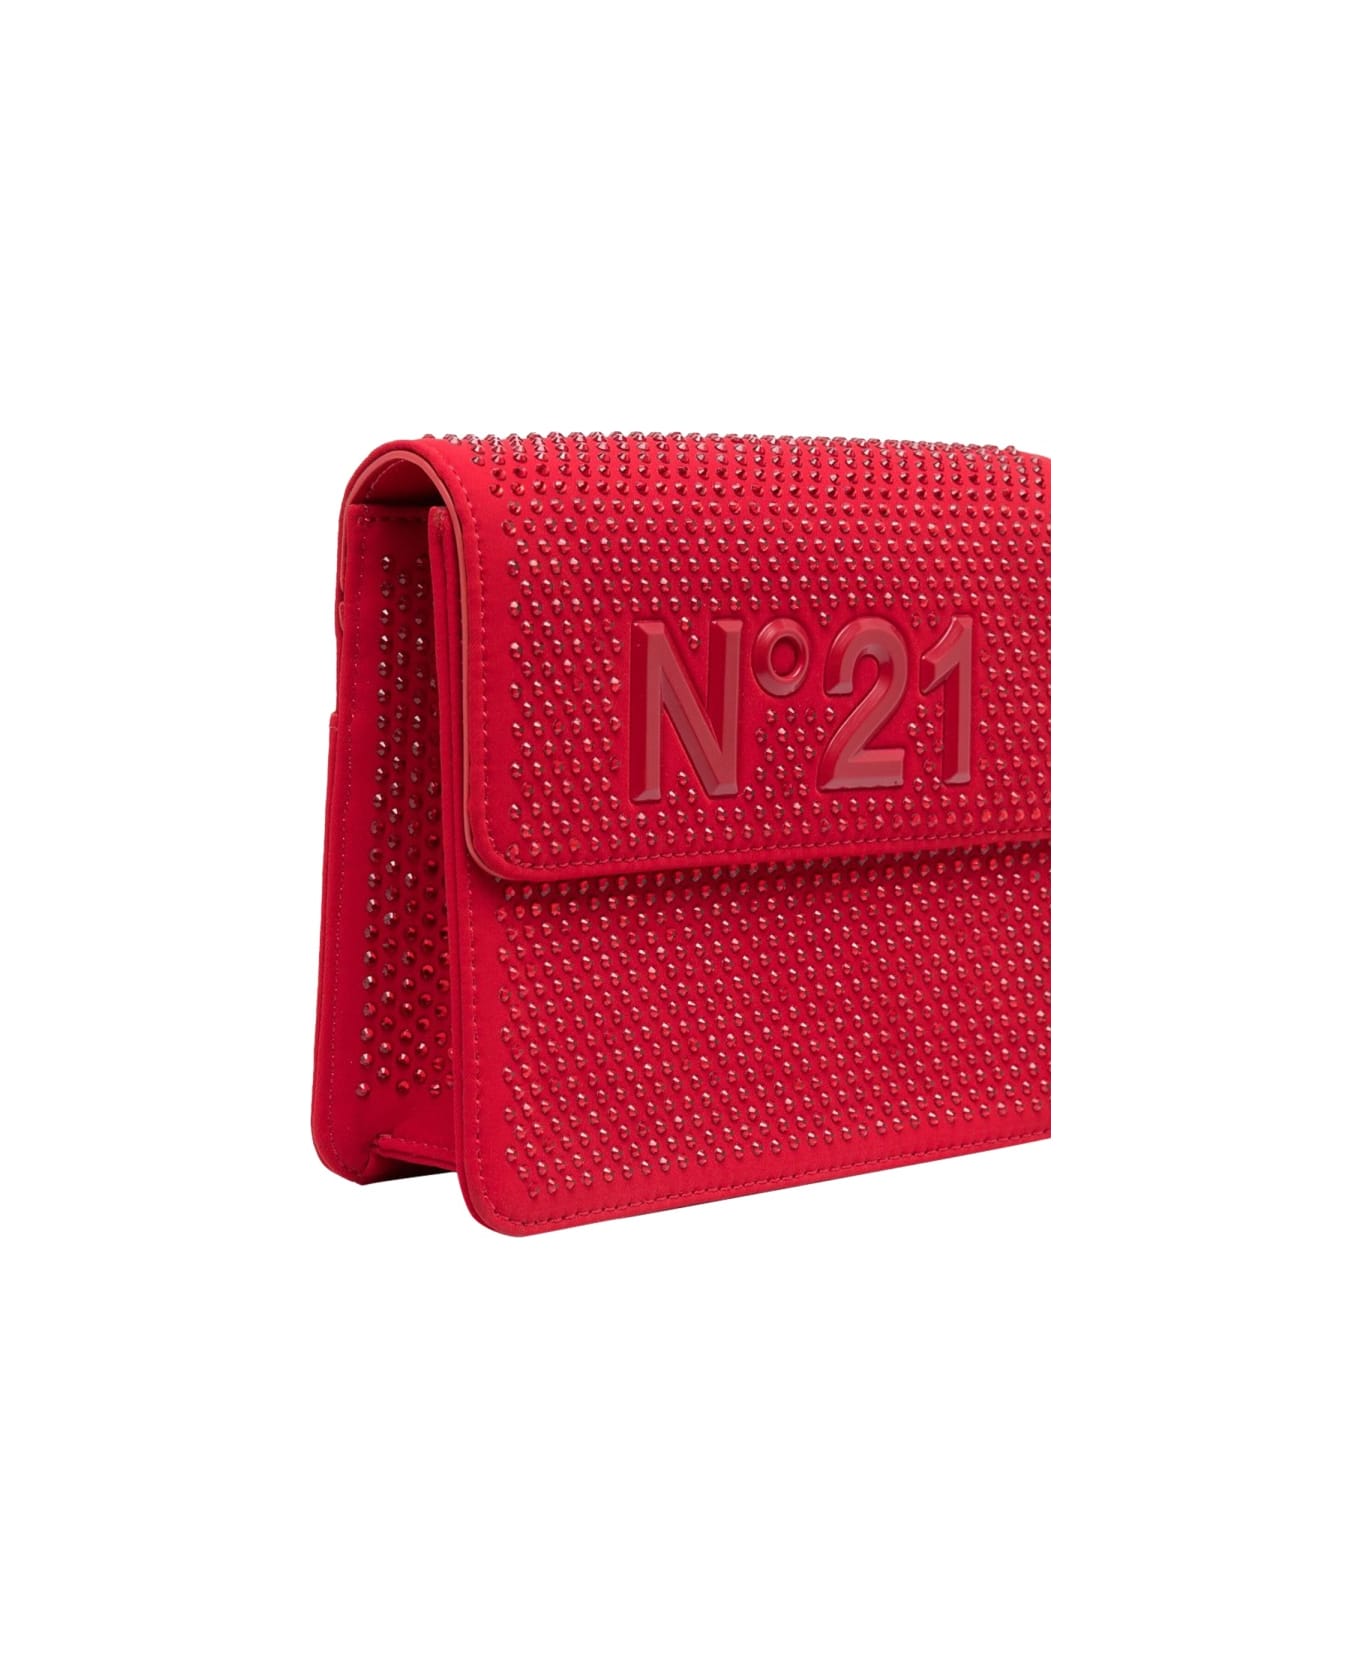 N.21 Pouch - RED アクセサリー＆ギフト